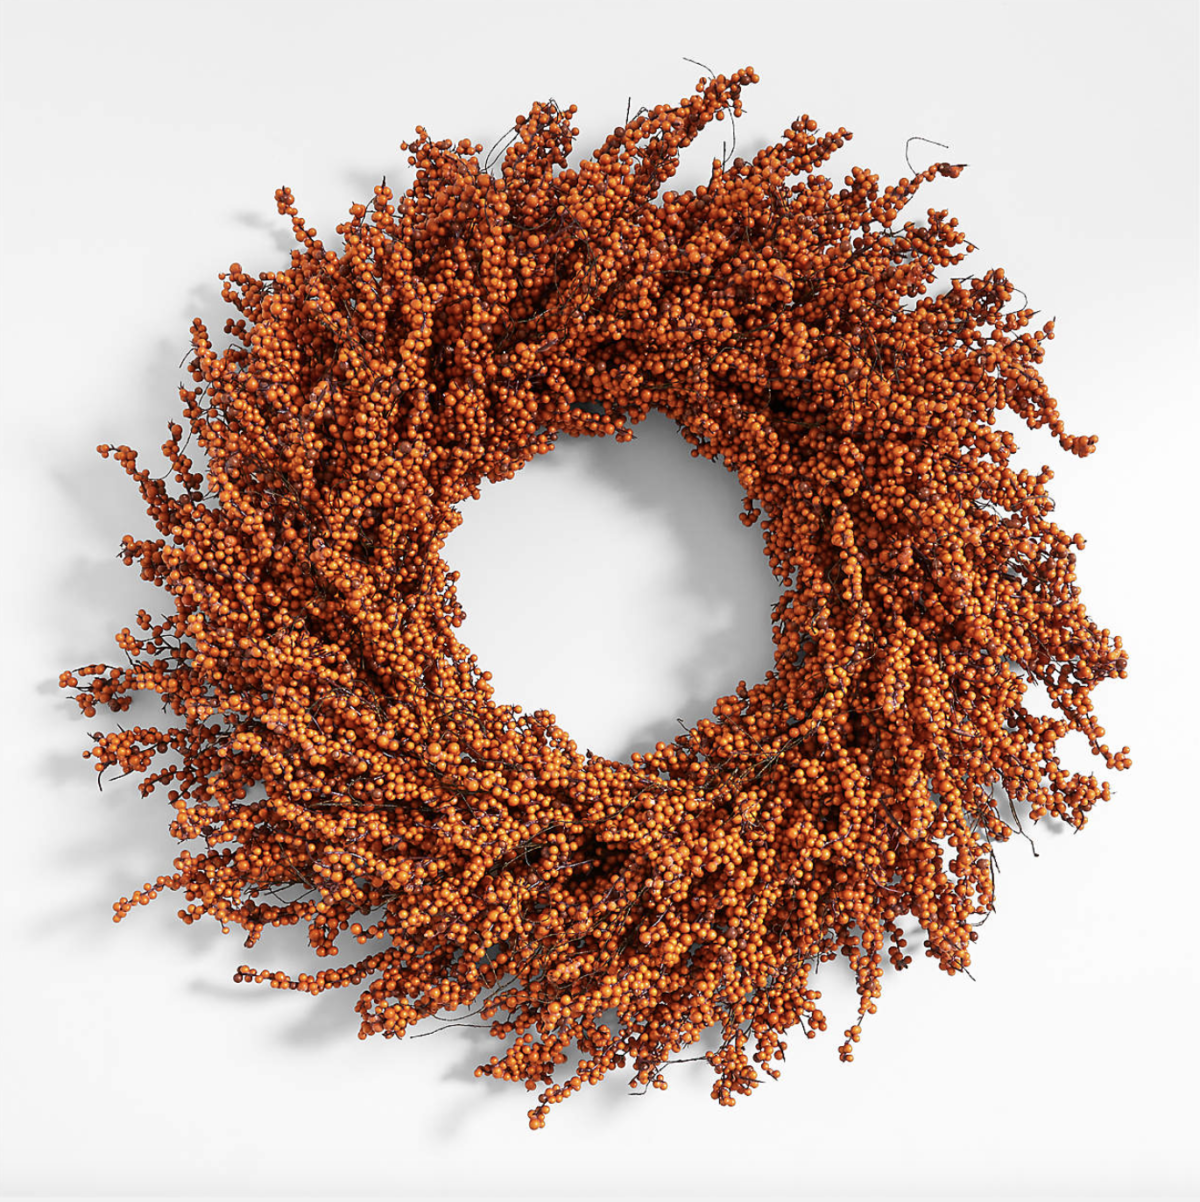 faux berry fall wreath comes in two colors for autumn decorating
